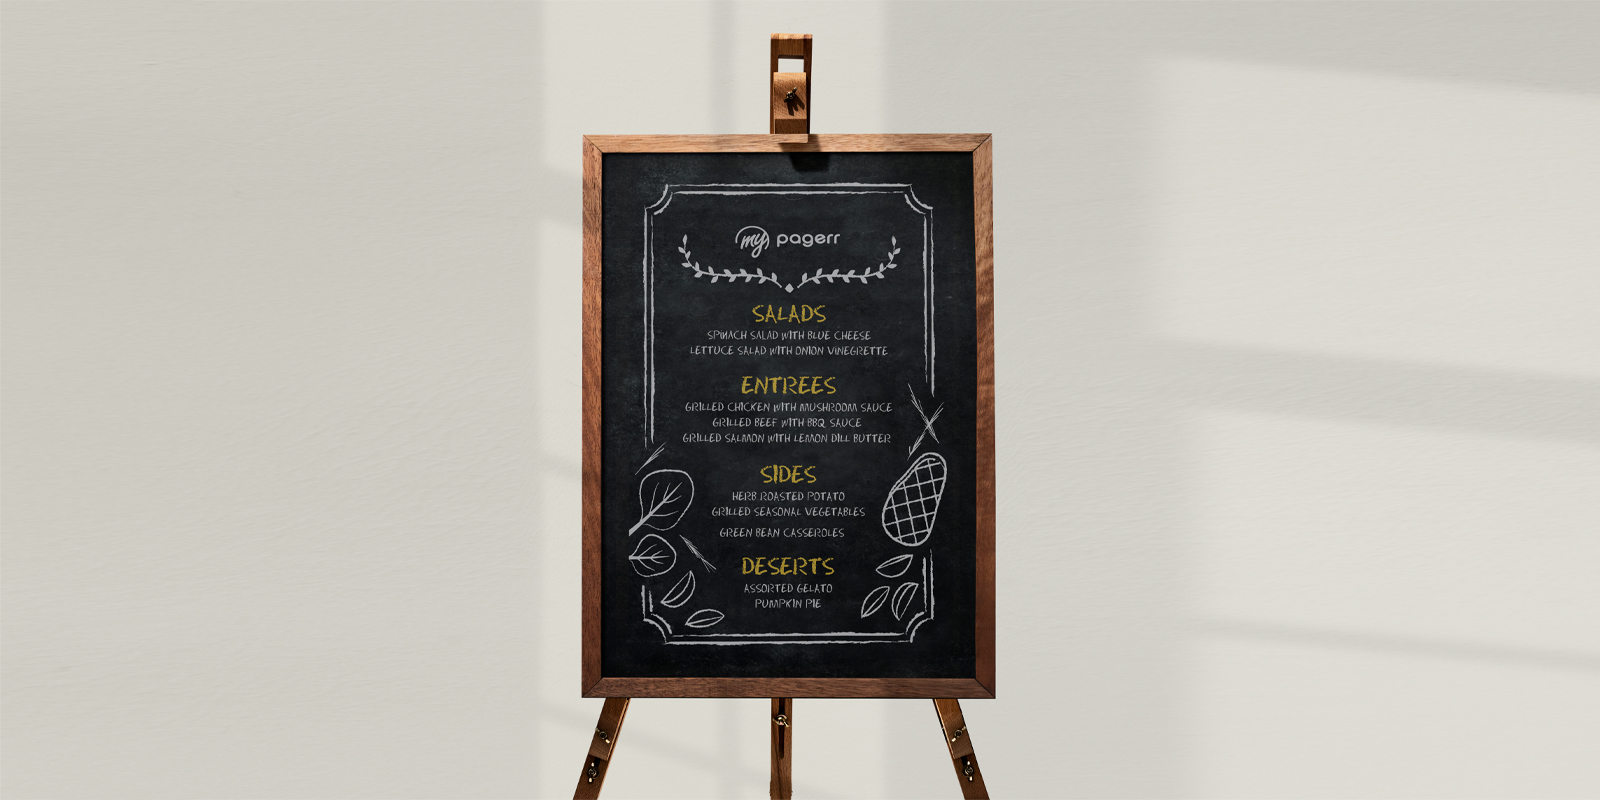 Chalkboard signs in Perth - Print with Pagerr